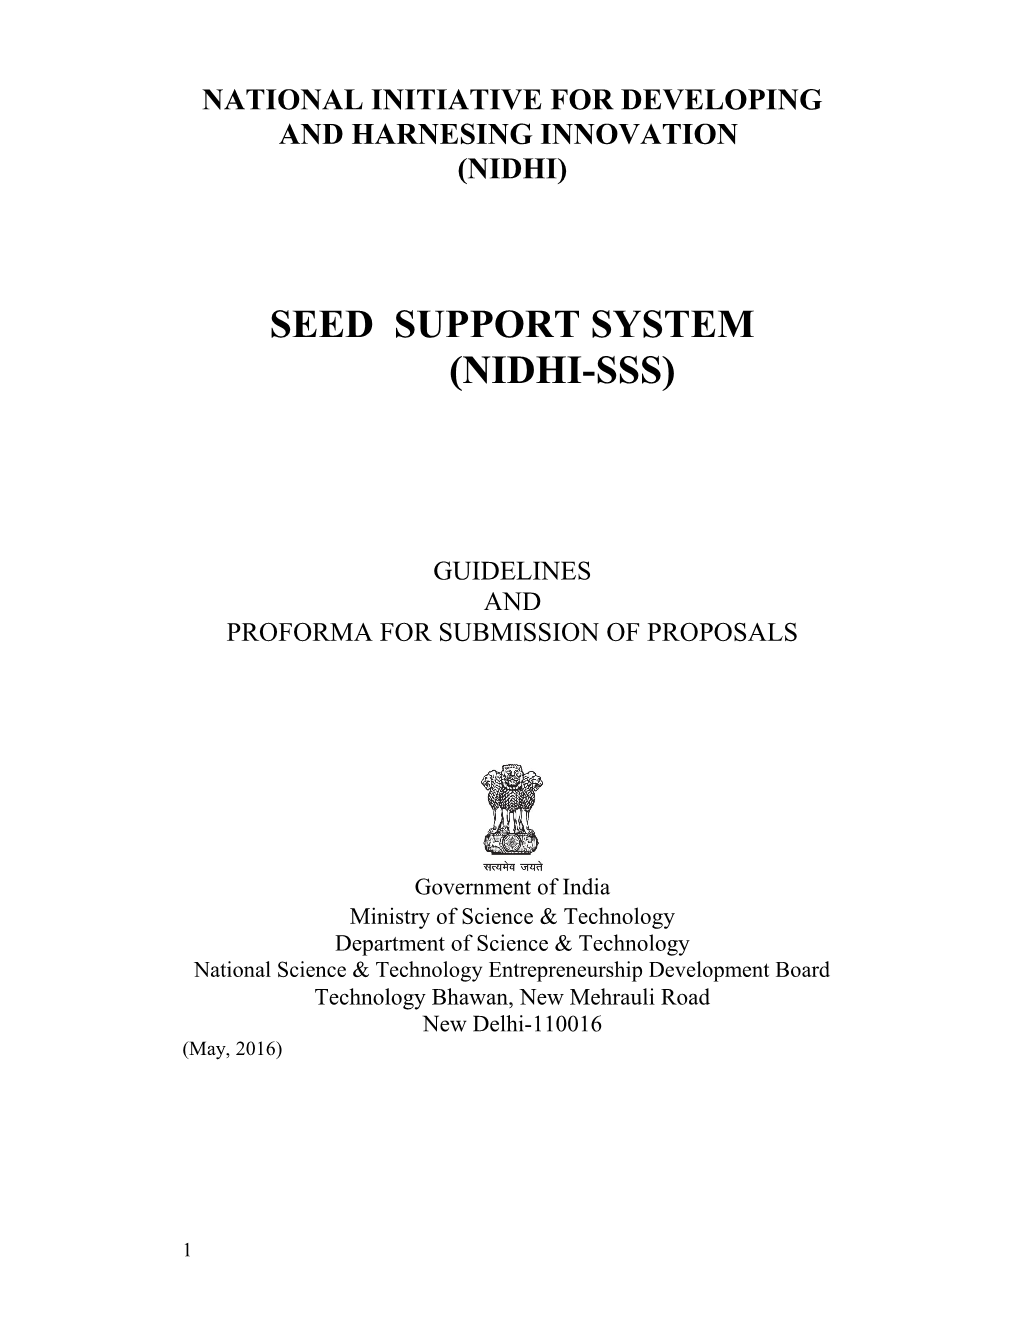 Seed Support System for Start-Ups in Incubators